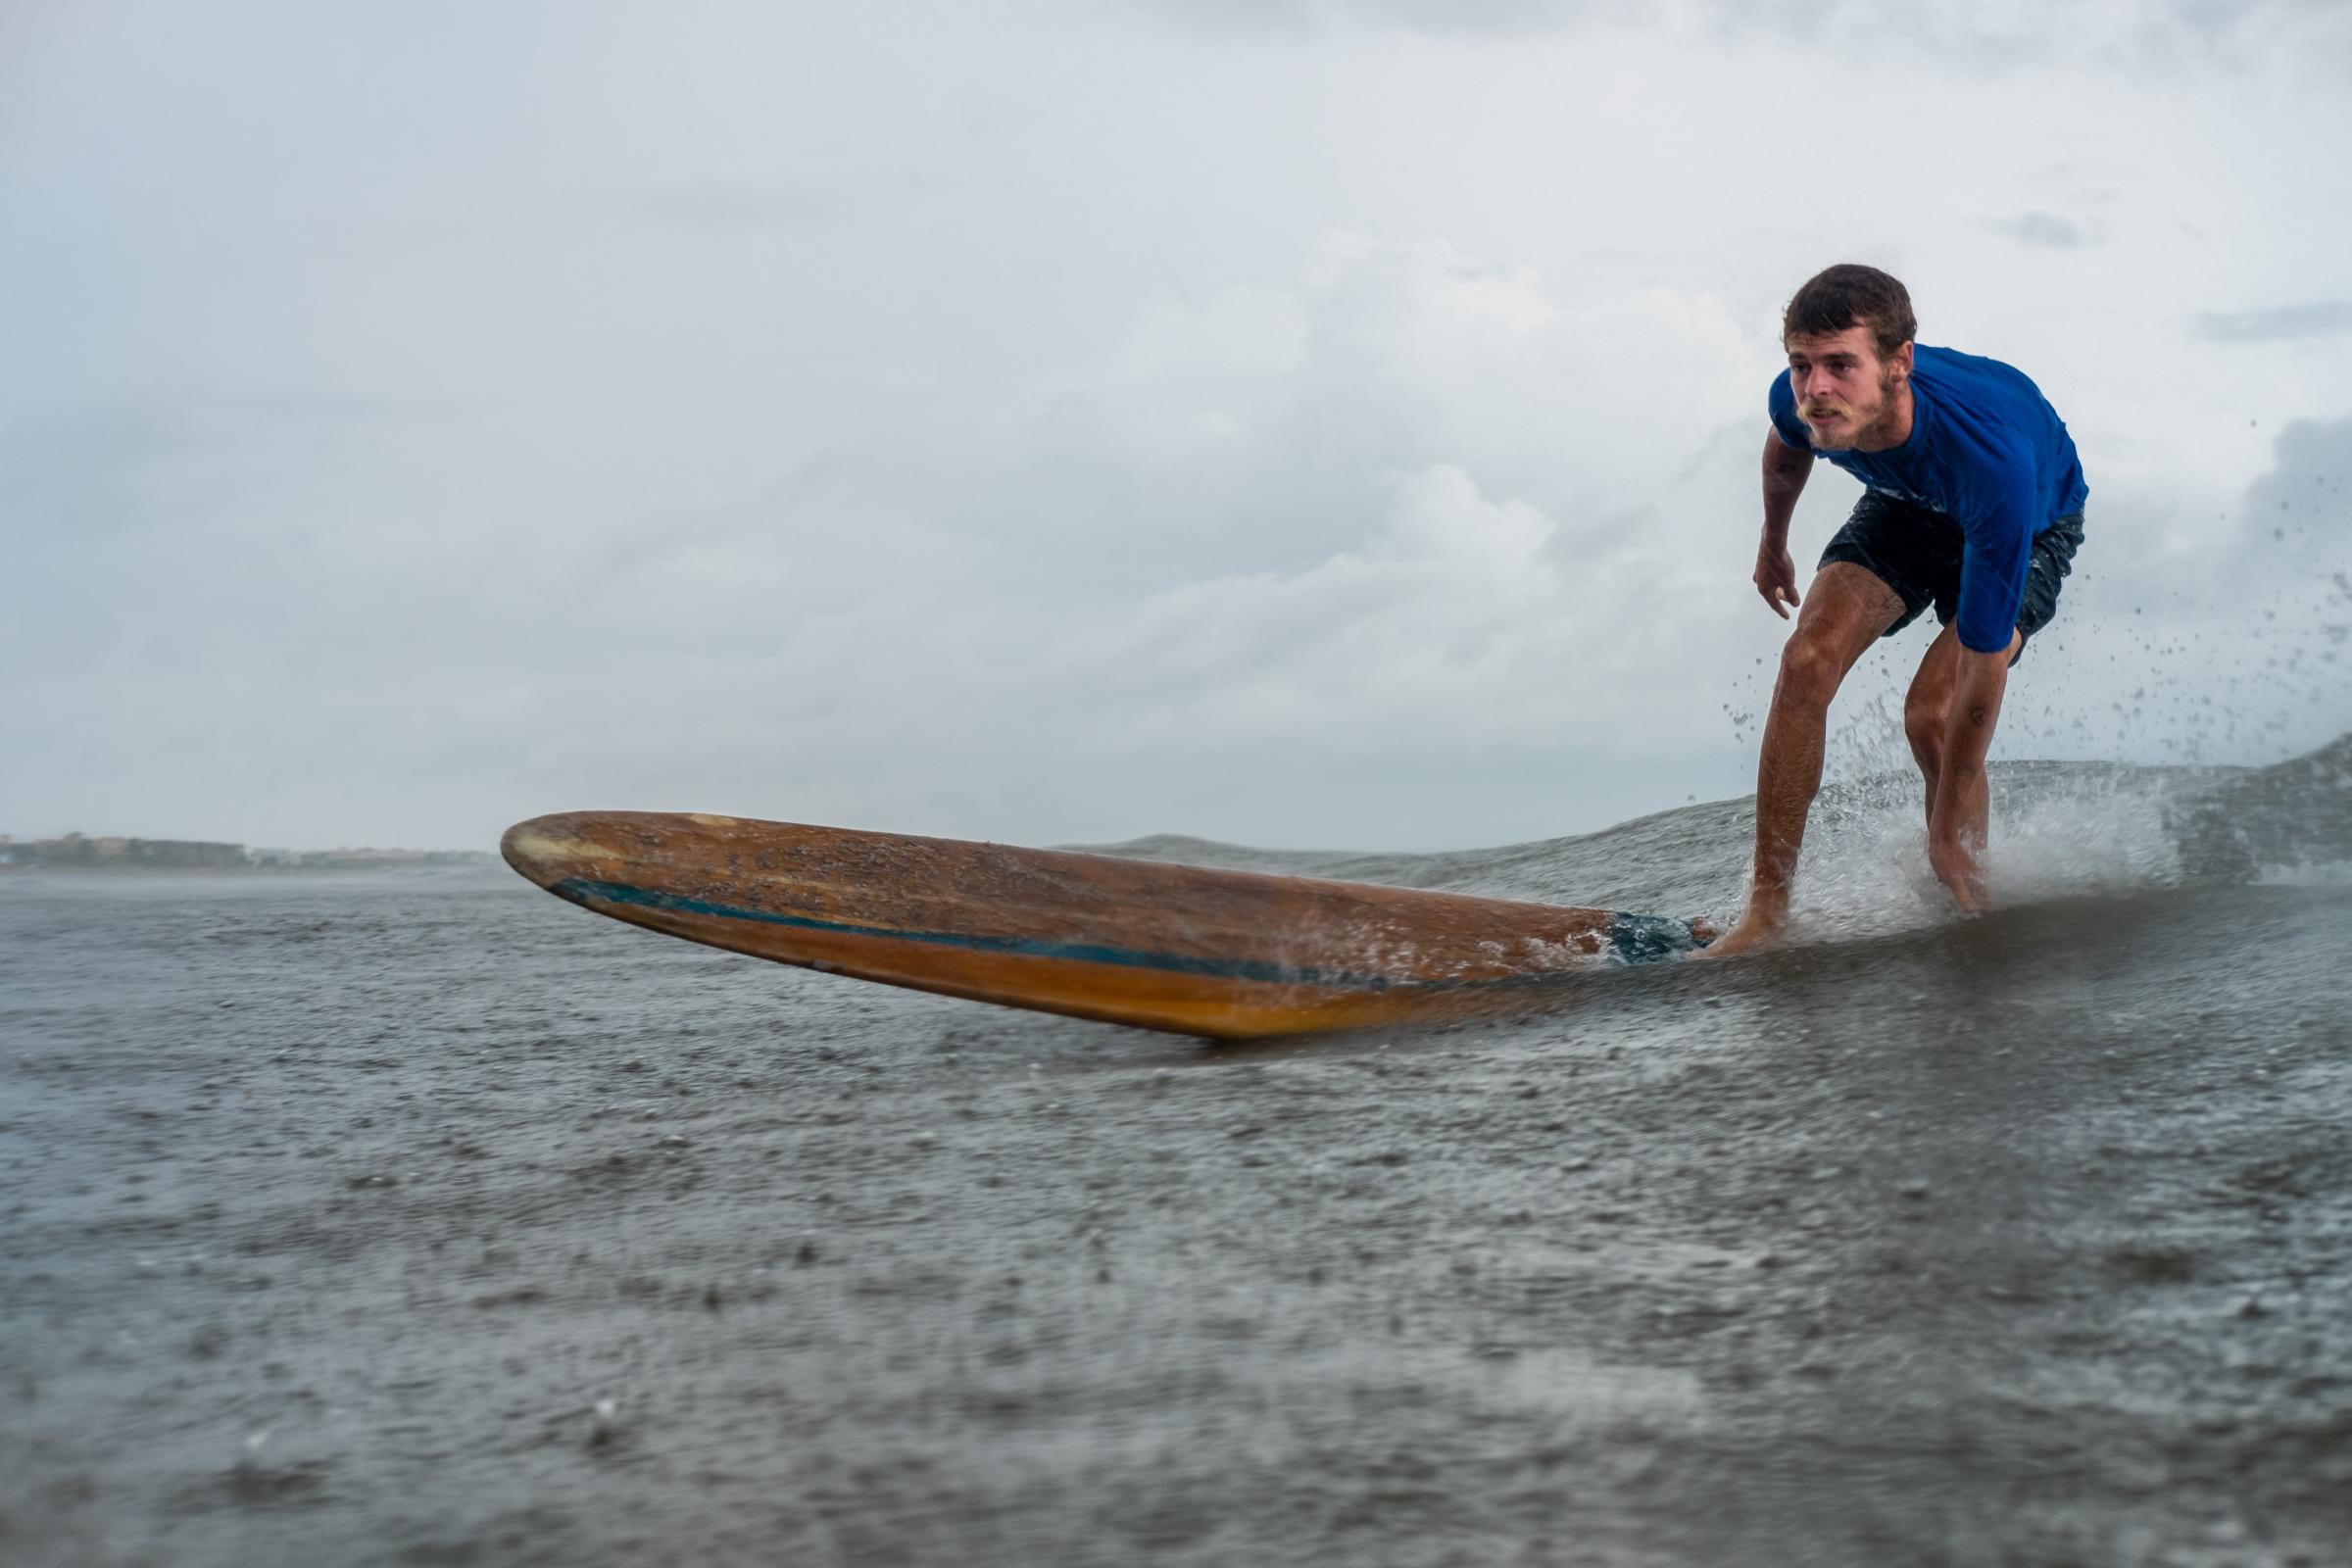  Patrick Conklin bottom turning on a 1960s longboard at the Third Annual Hotdogzonastix Surf Contest presented by Core Surf. Cape Canaveral, FL....